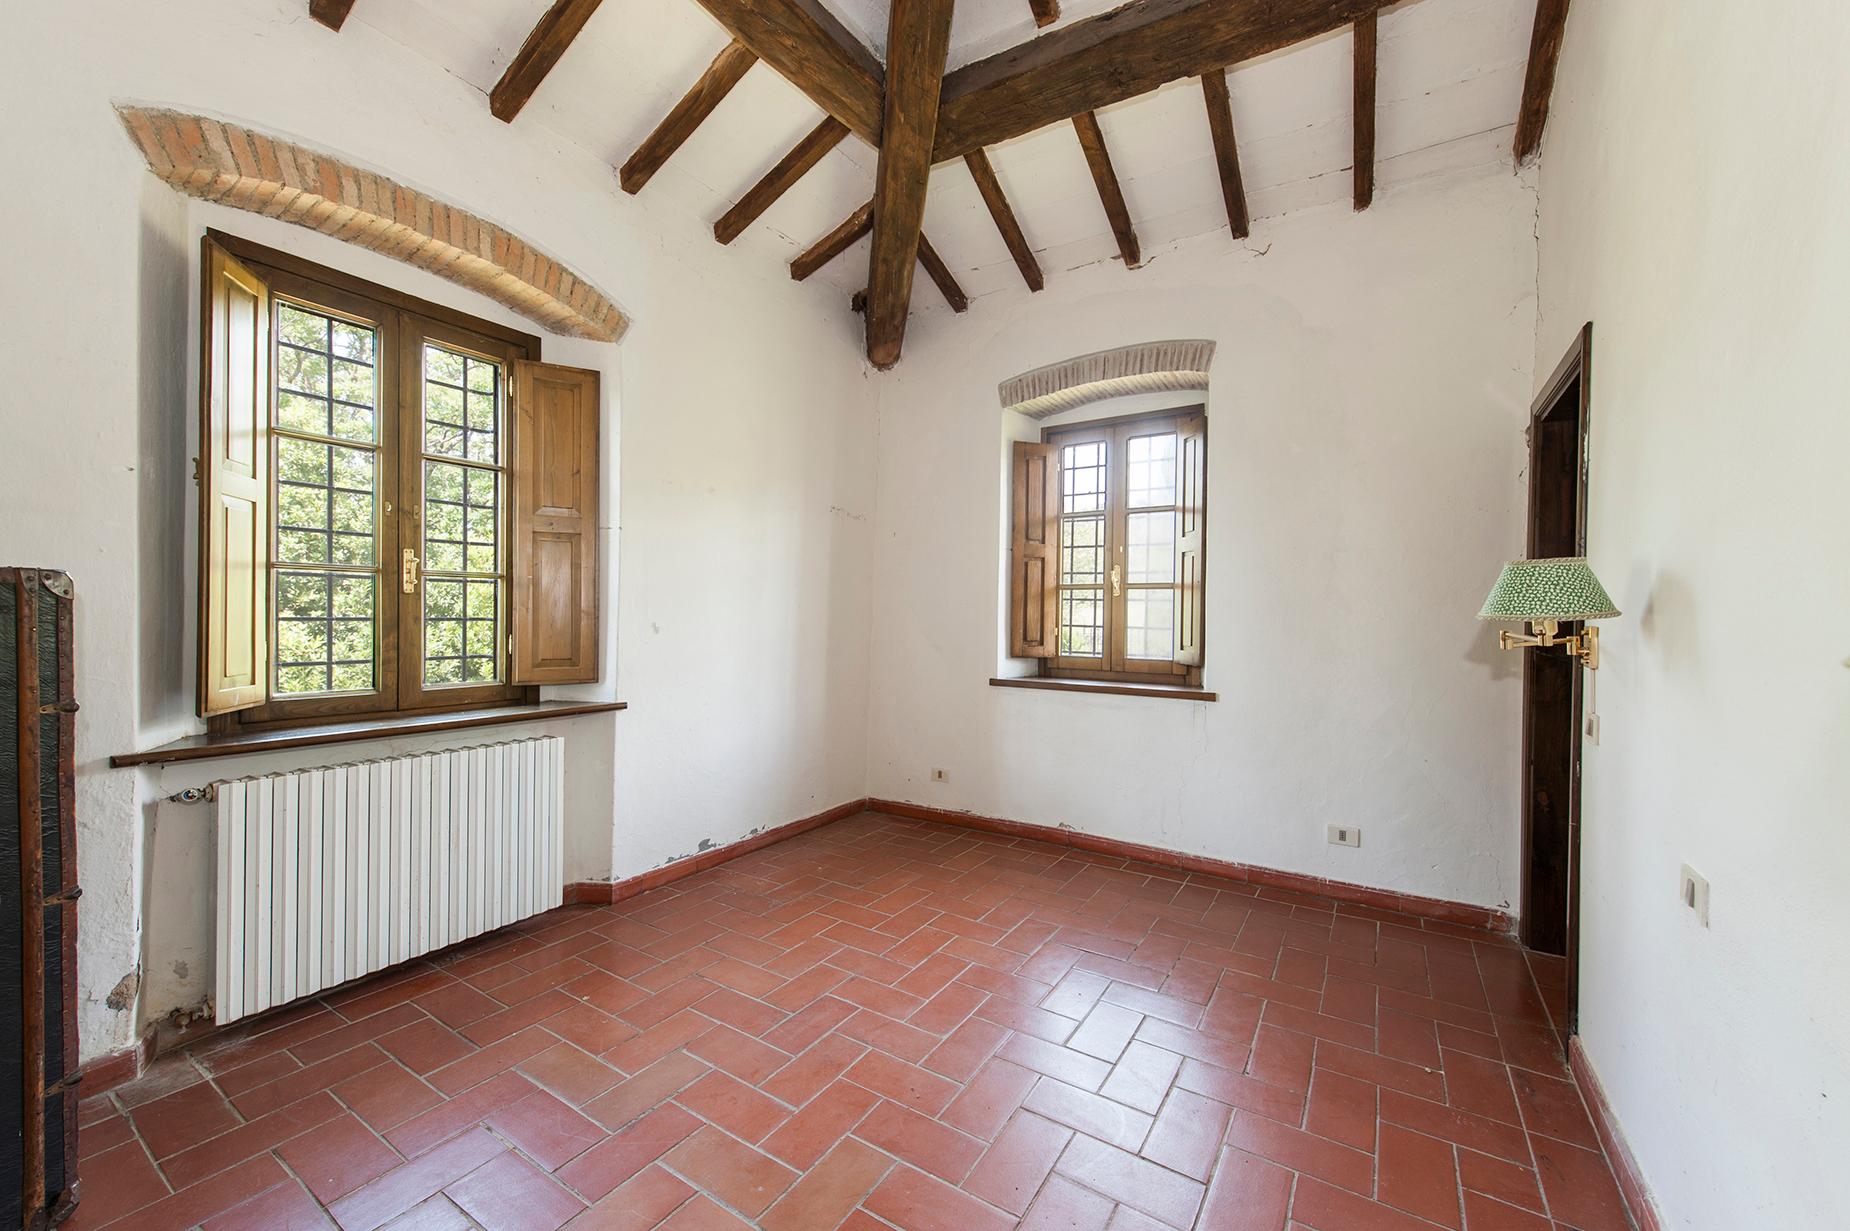 Ancient farmhouse with private land in Maremma - 10